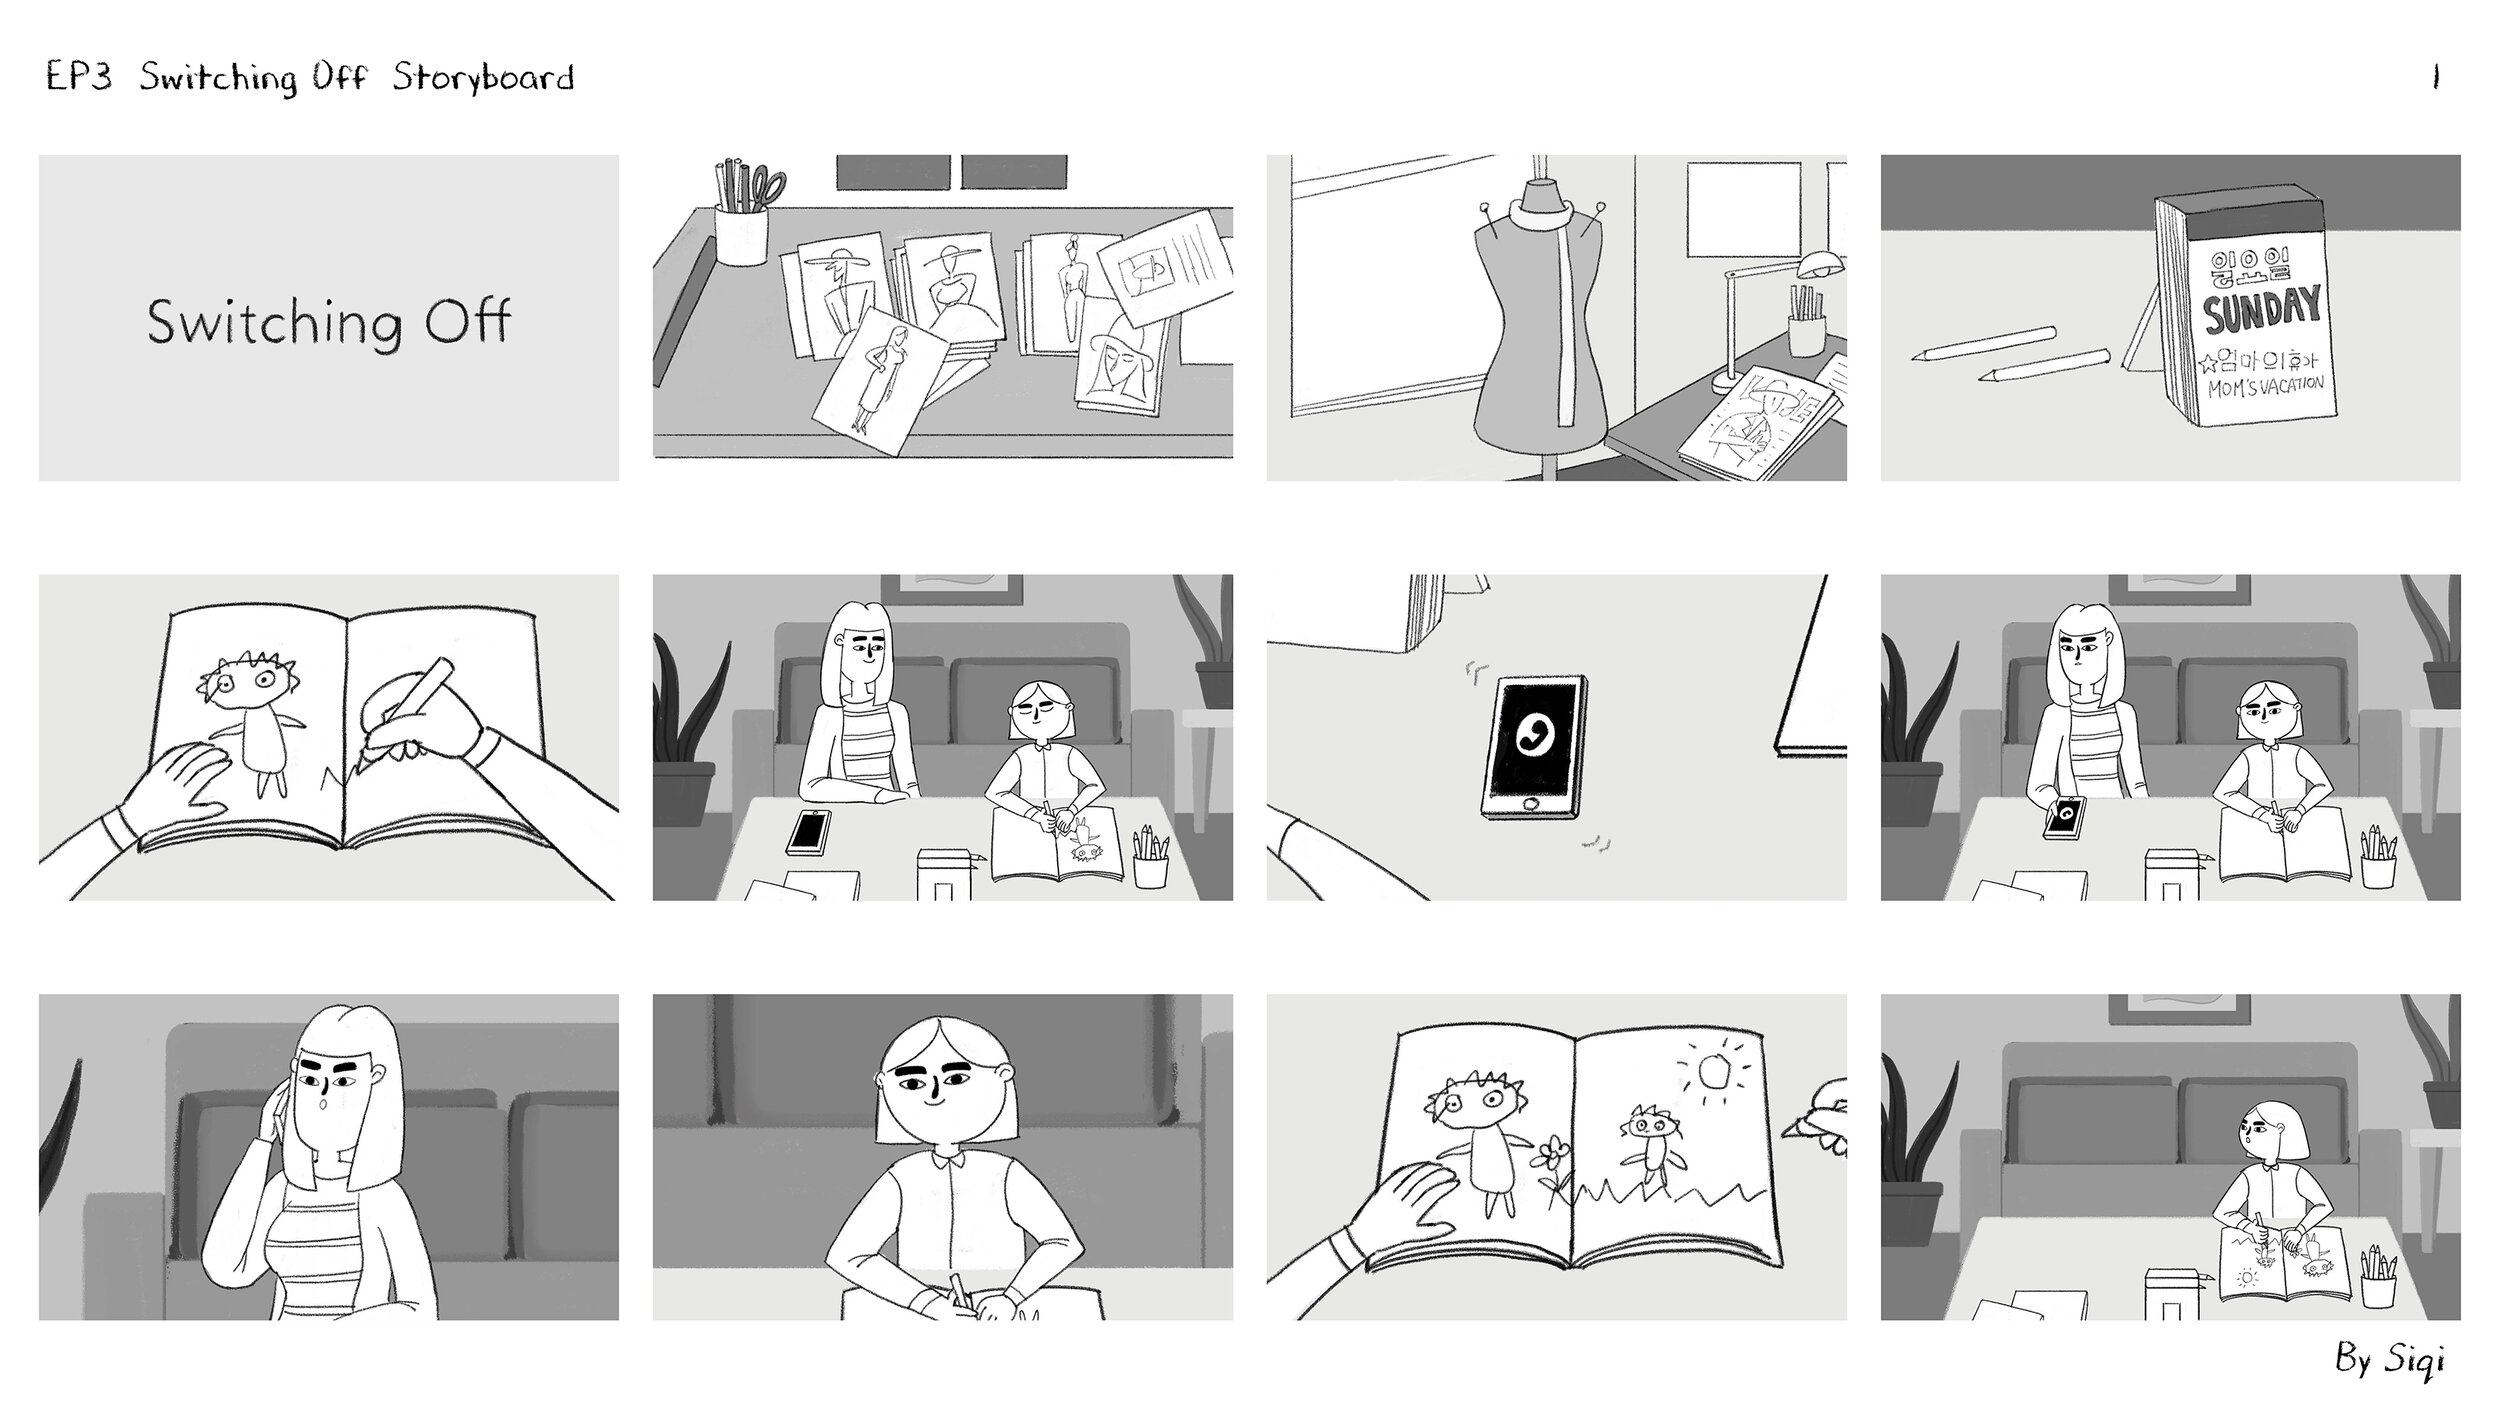 EP3_Switching Off_Storyboard_Page_1.jpg